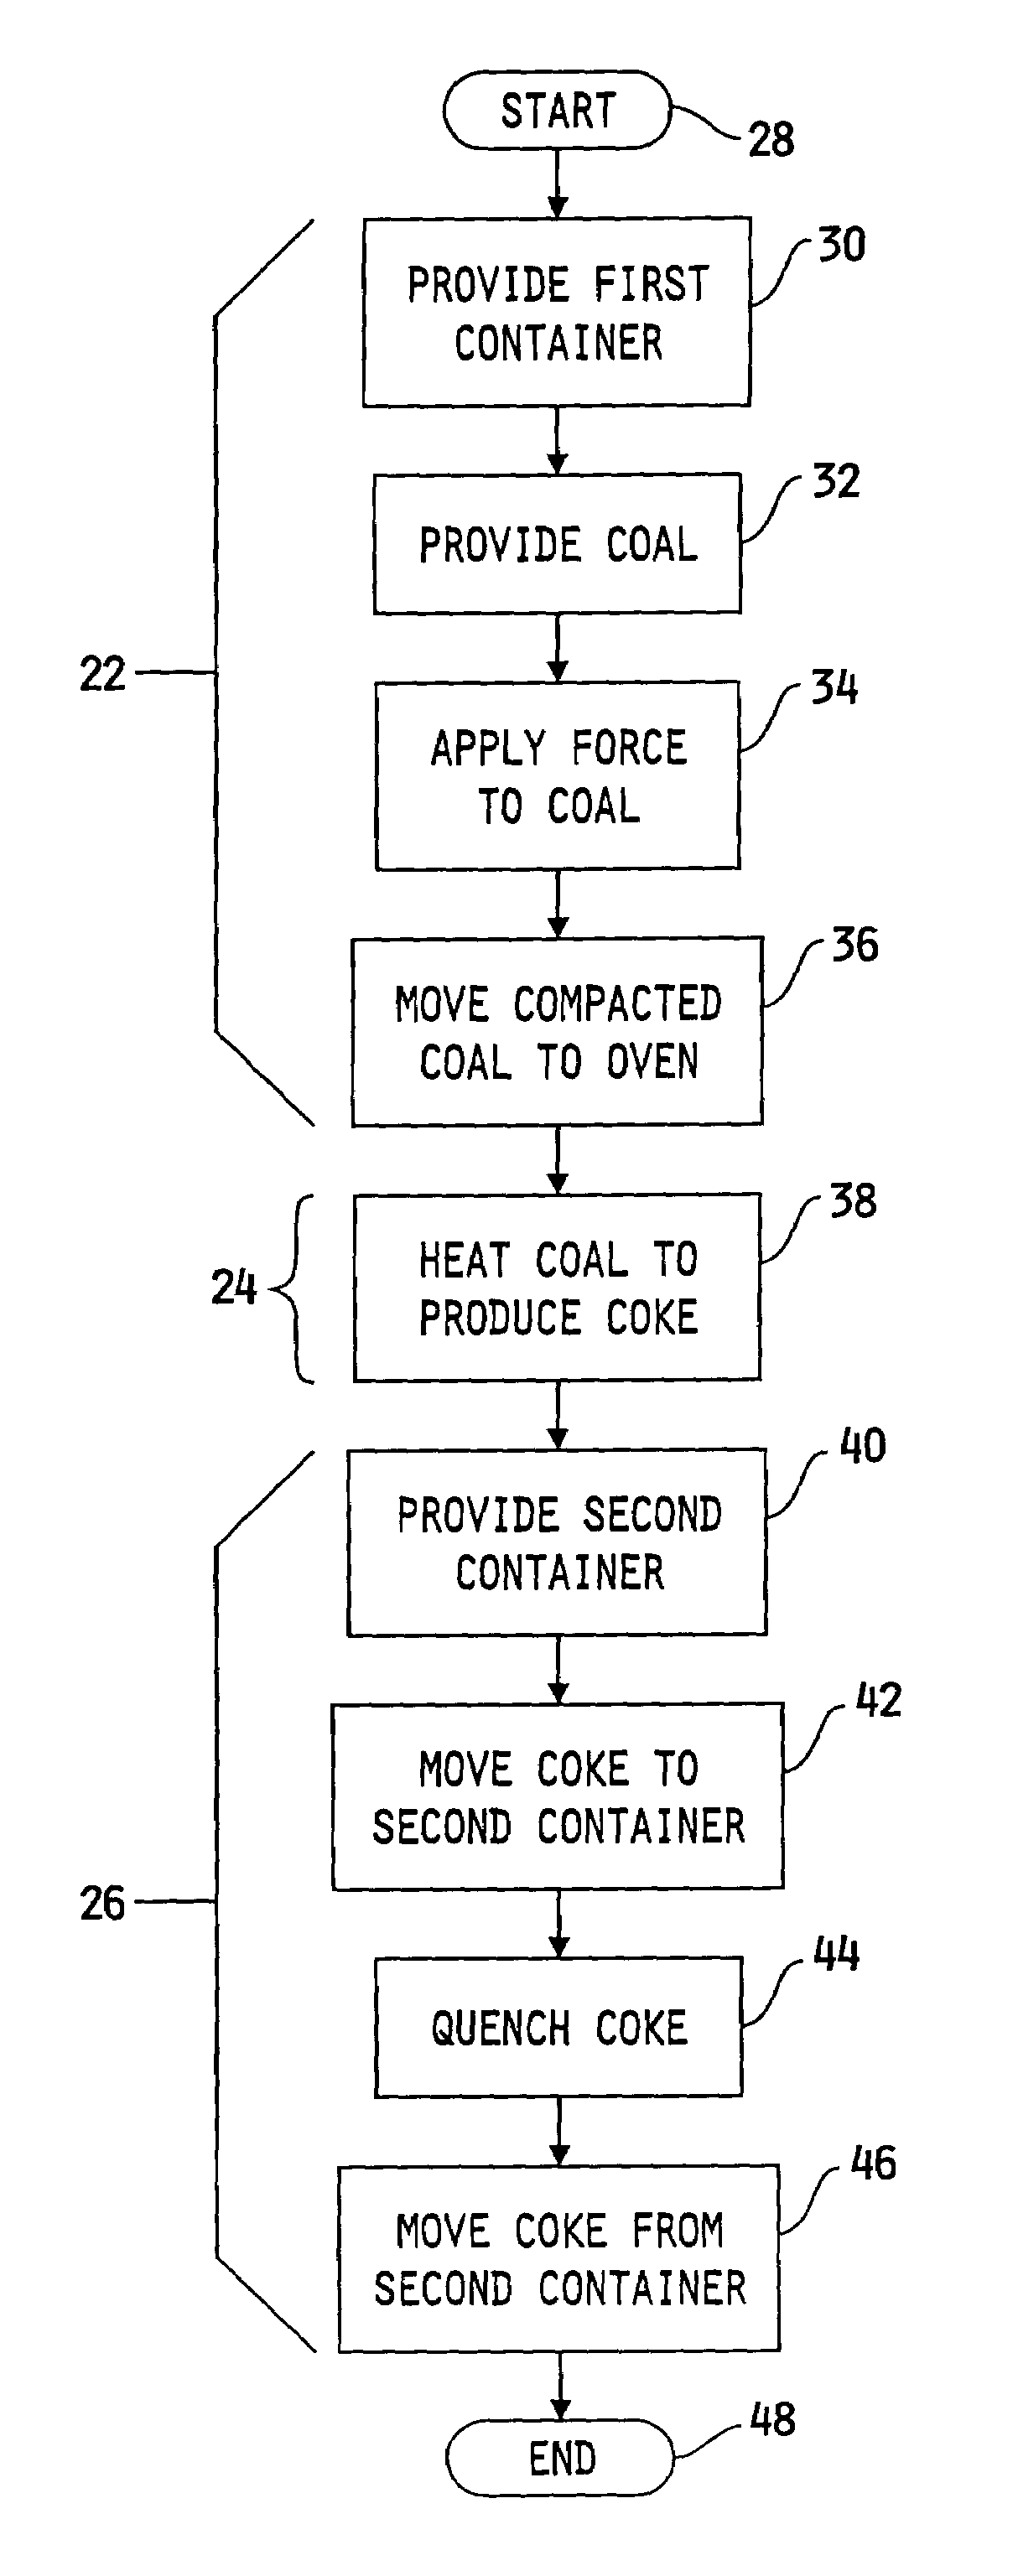 Method for producing blast furnace coke through coal compaction in a non-recovery or heat recovery type oven